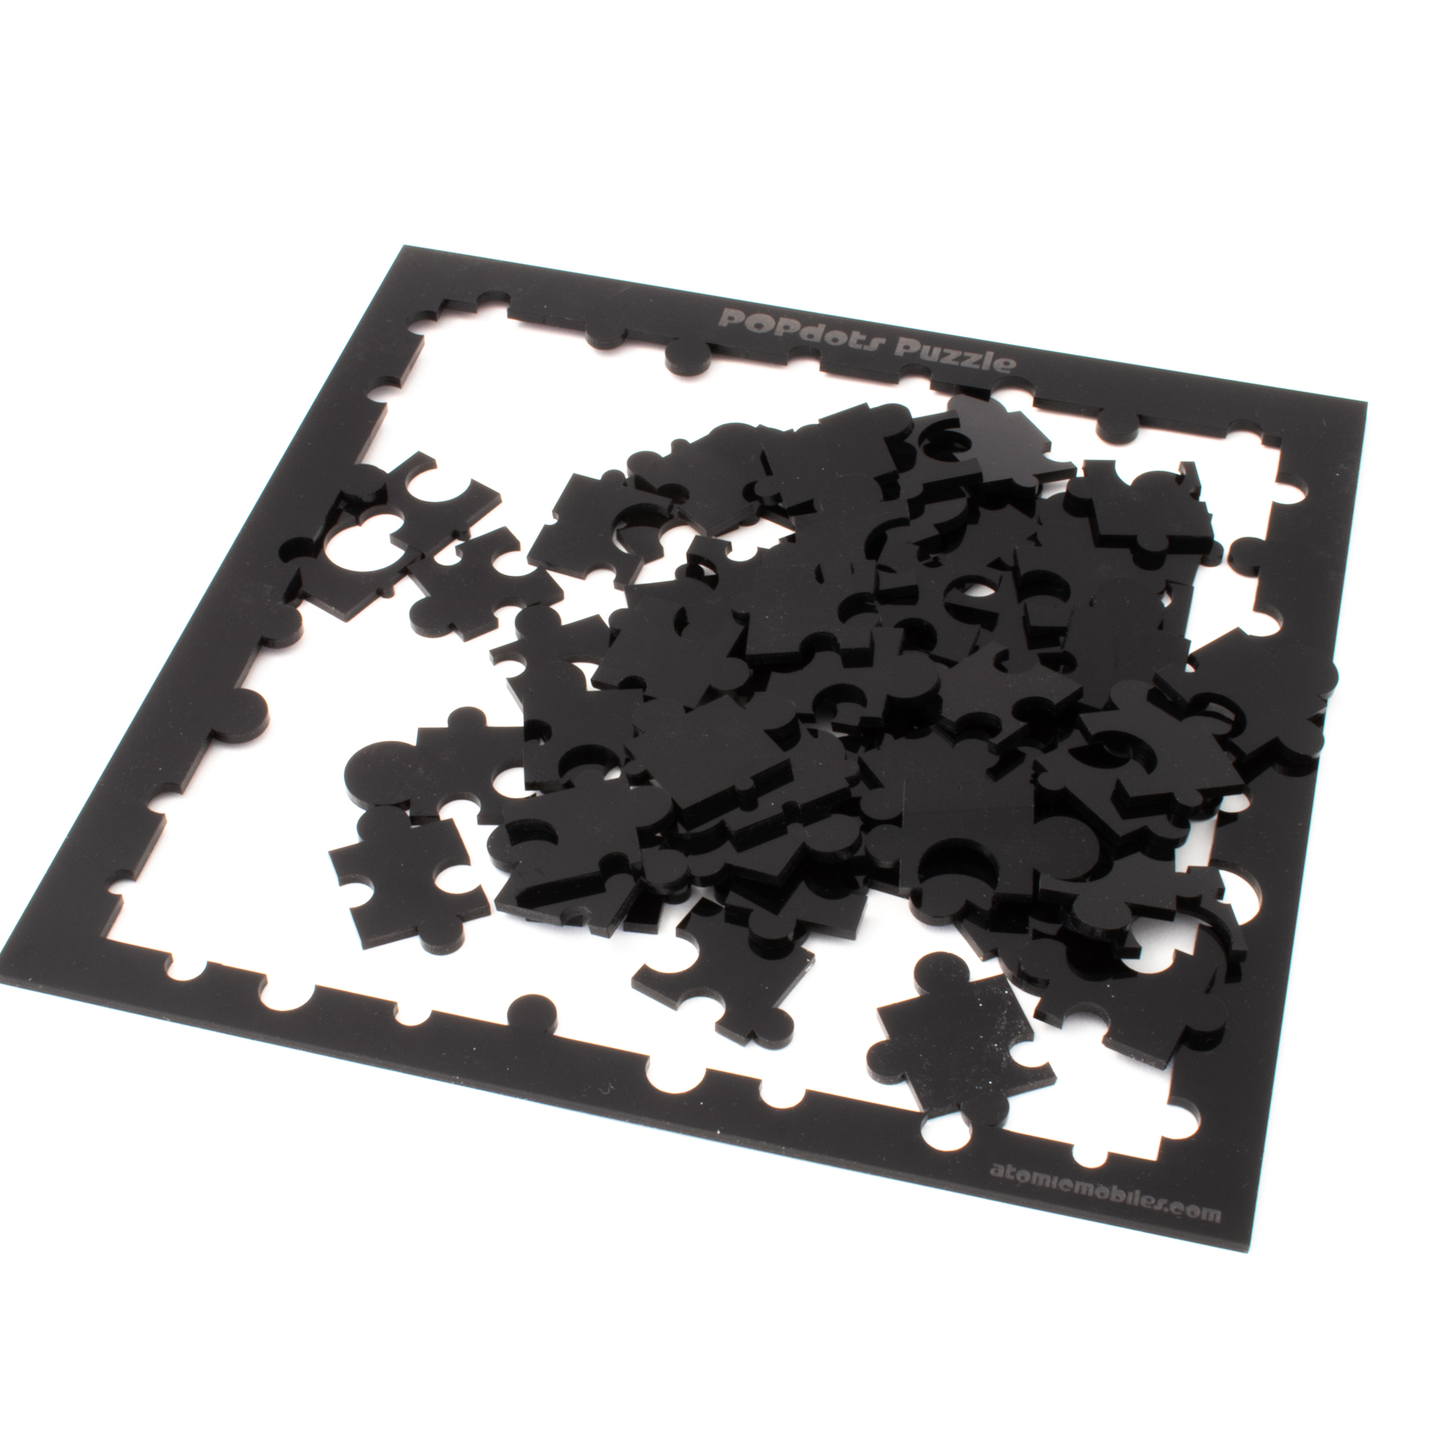 Modern glossy black acrylic jigsaw puzzle designed by AtomicMobiles.com